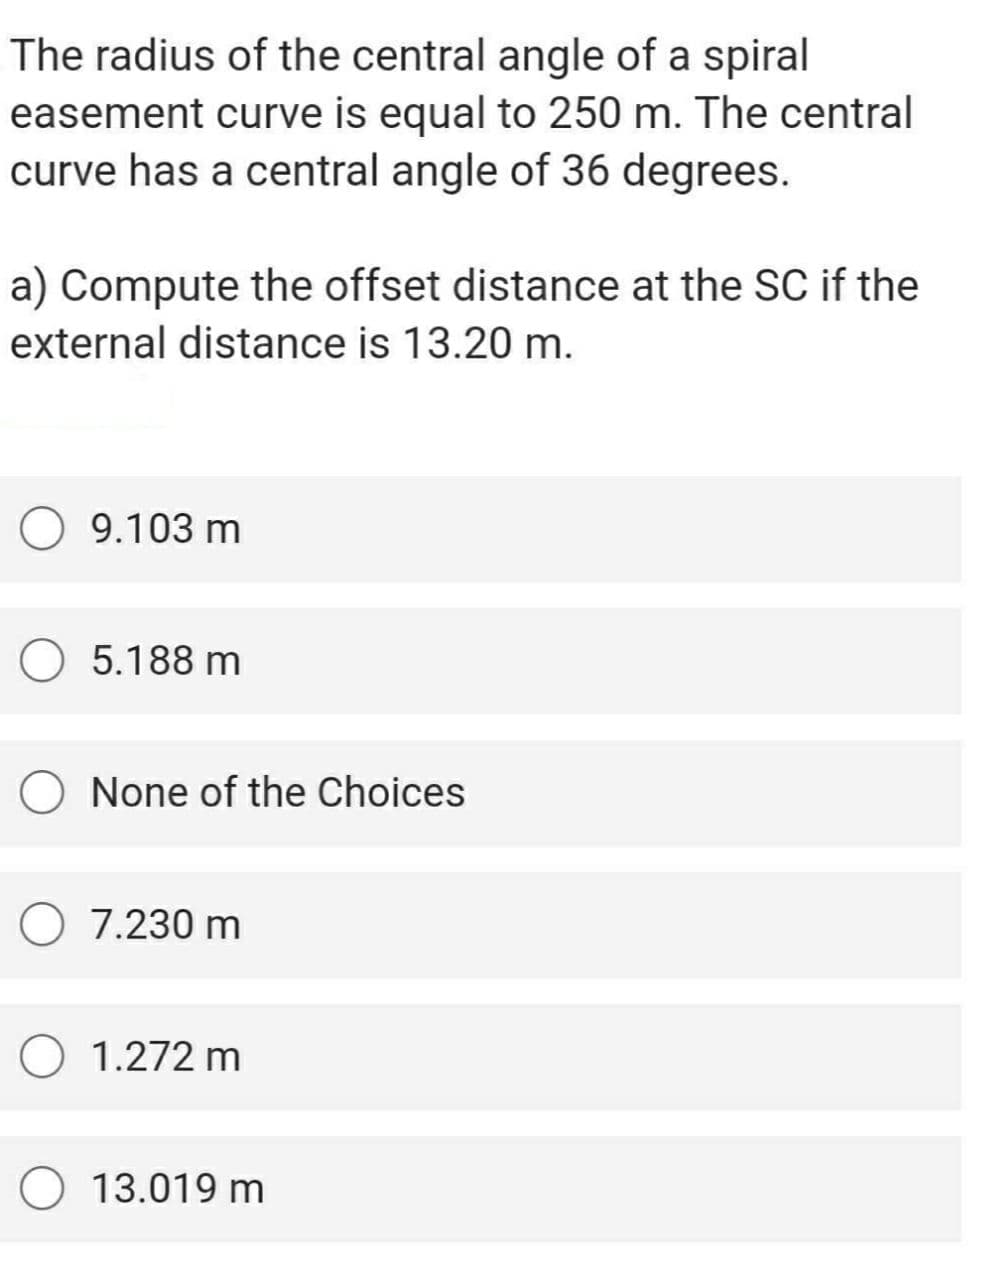 The radius of the central angle of a spiral
easement curve is equal to 250 m. The central
curve has a central angle of 36 degrees.
a) Compute the offset distance at the SC if the
external distance is 13.20 m.
O 9.103 m
5.188 m
O None of the Choices
O 7.230 m
1.272 m
O 13.019 m
